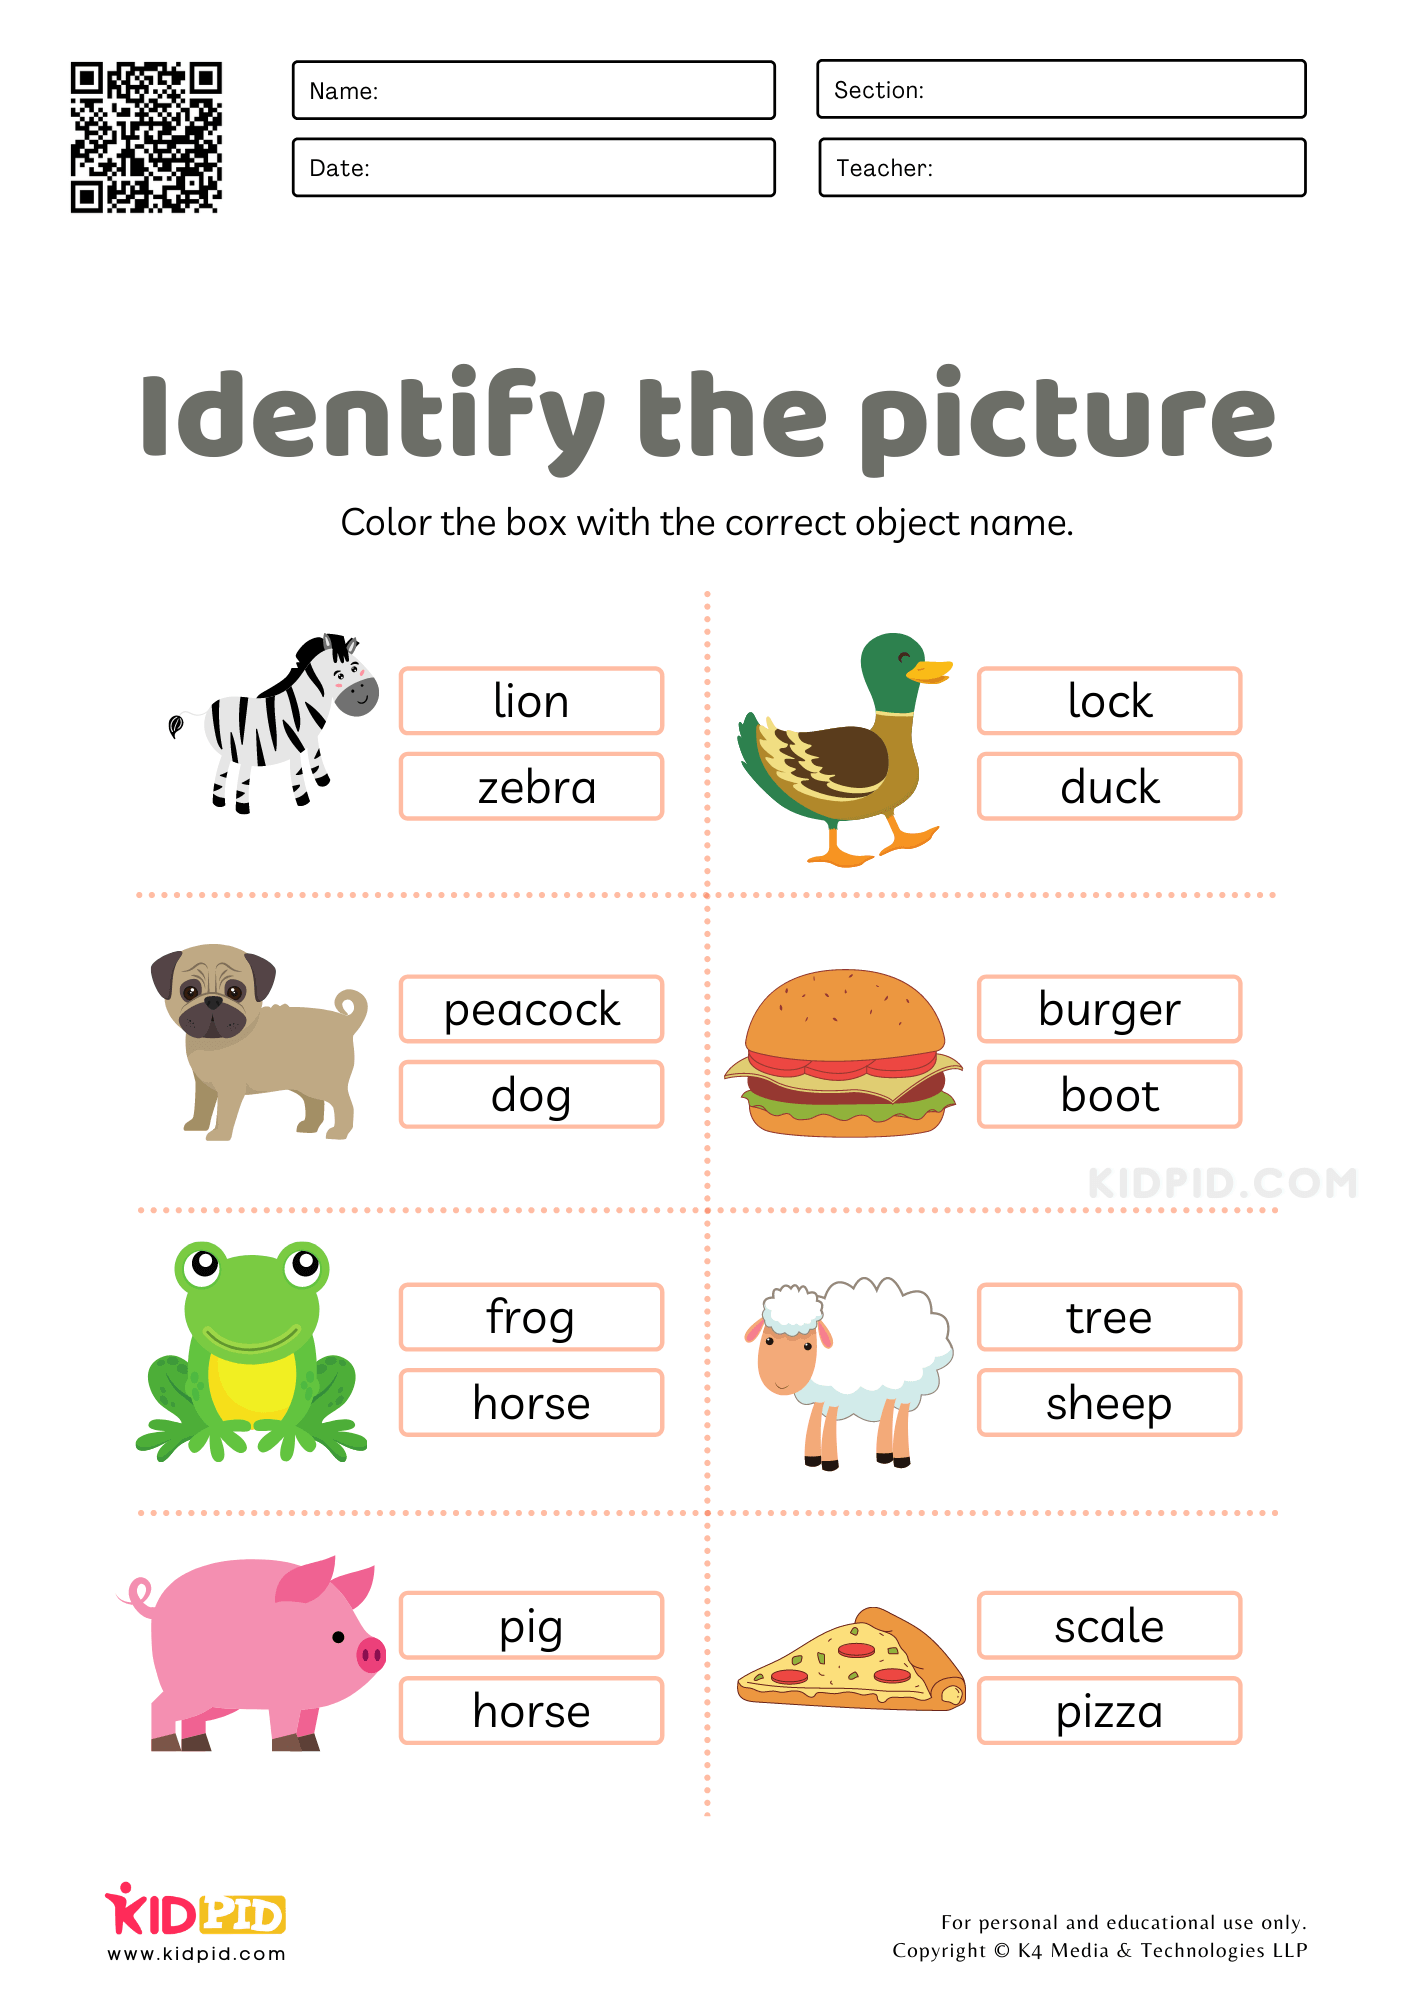 identifying-objects-words-worksheets-for-kids-kidpid